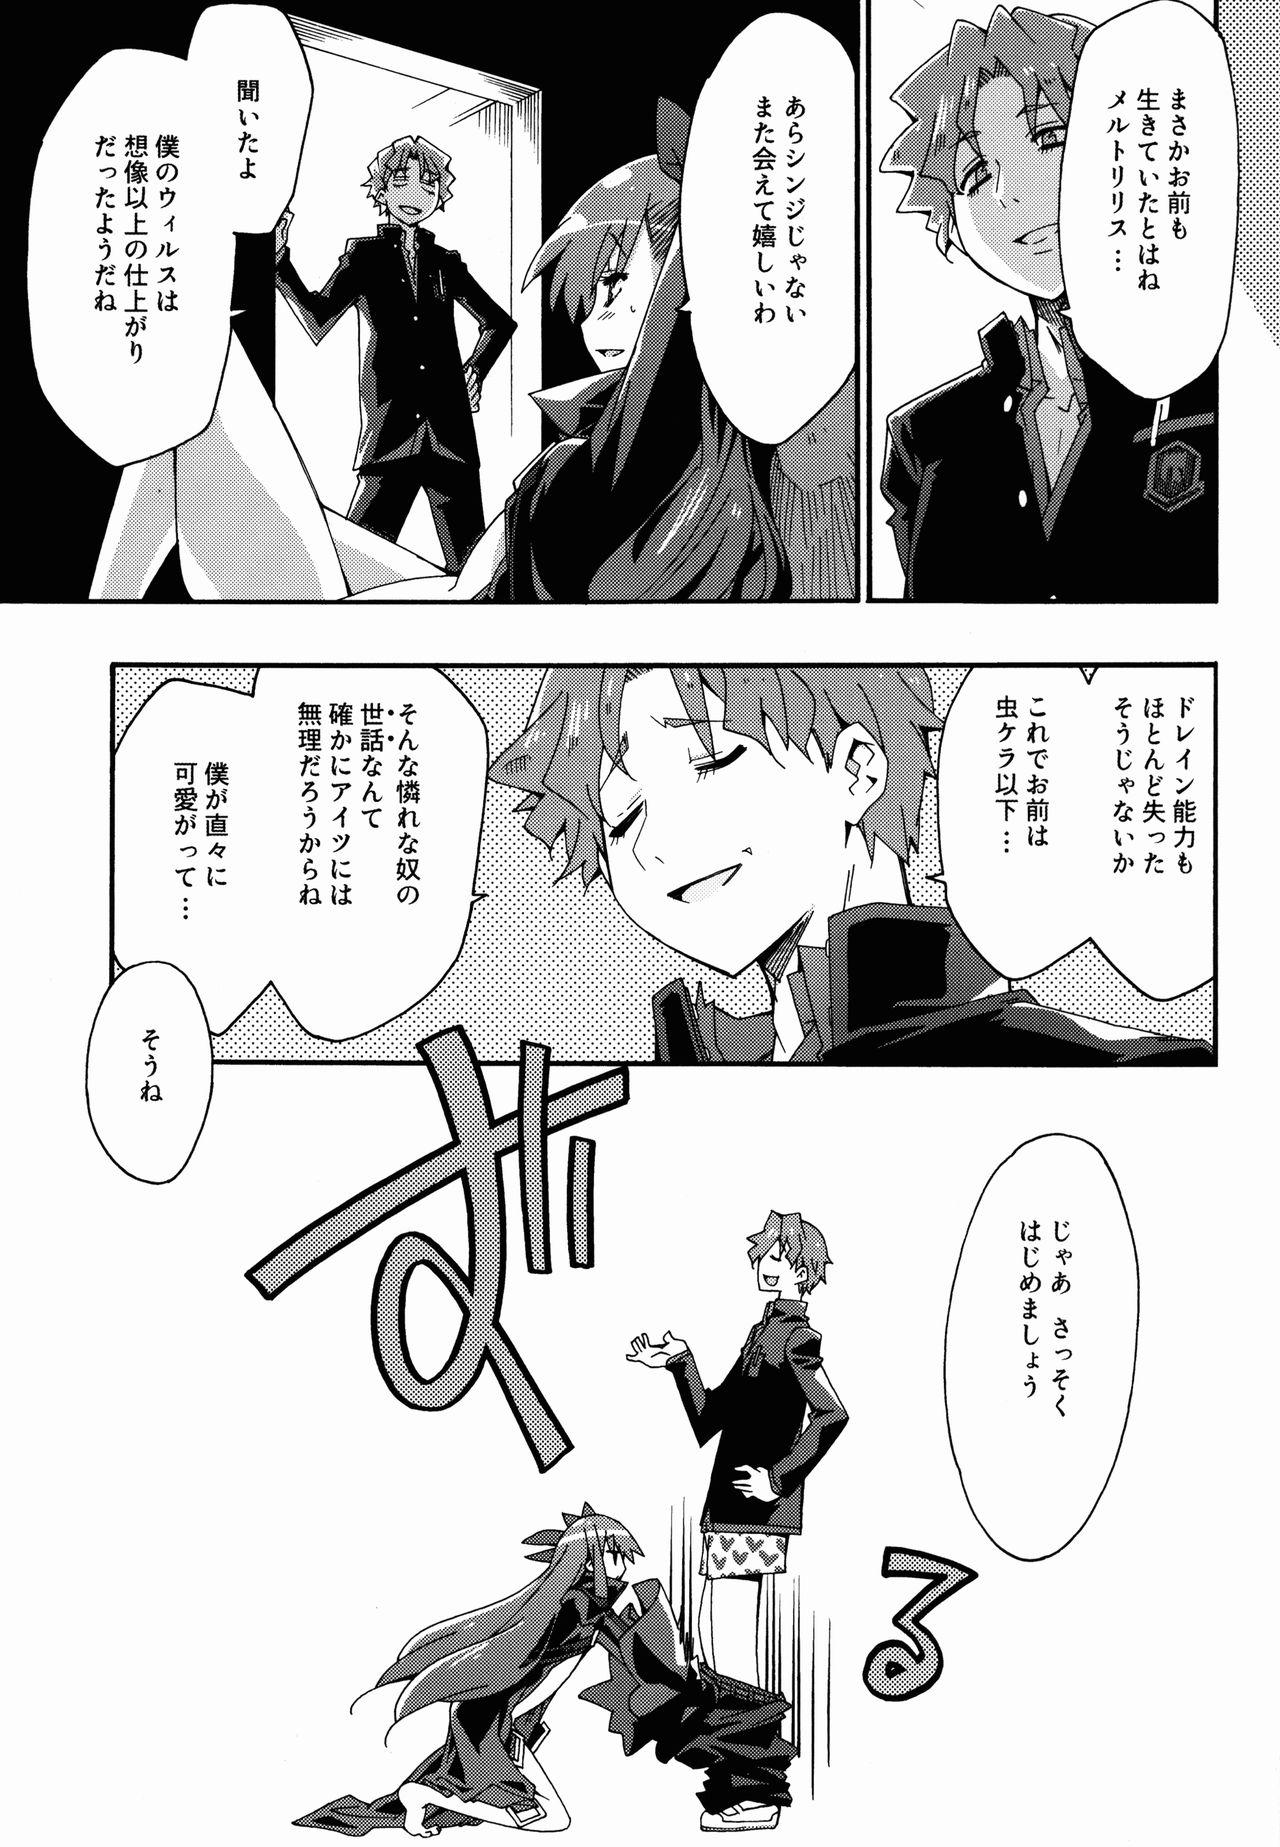 Taiwan Melty/kiss - Fate extra Kiss - Page 9